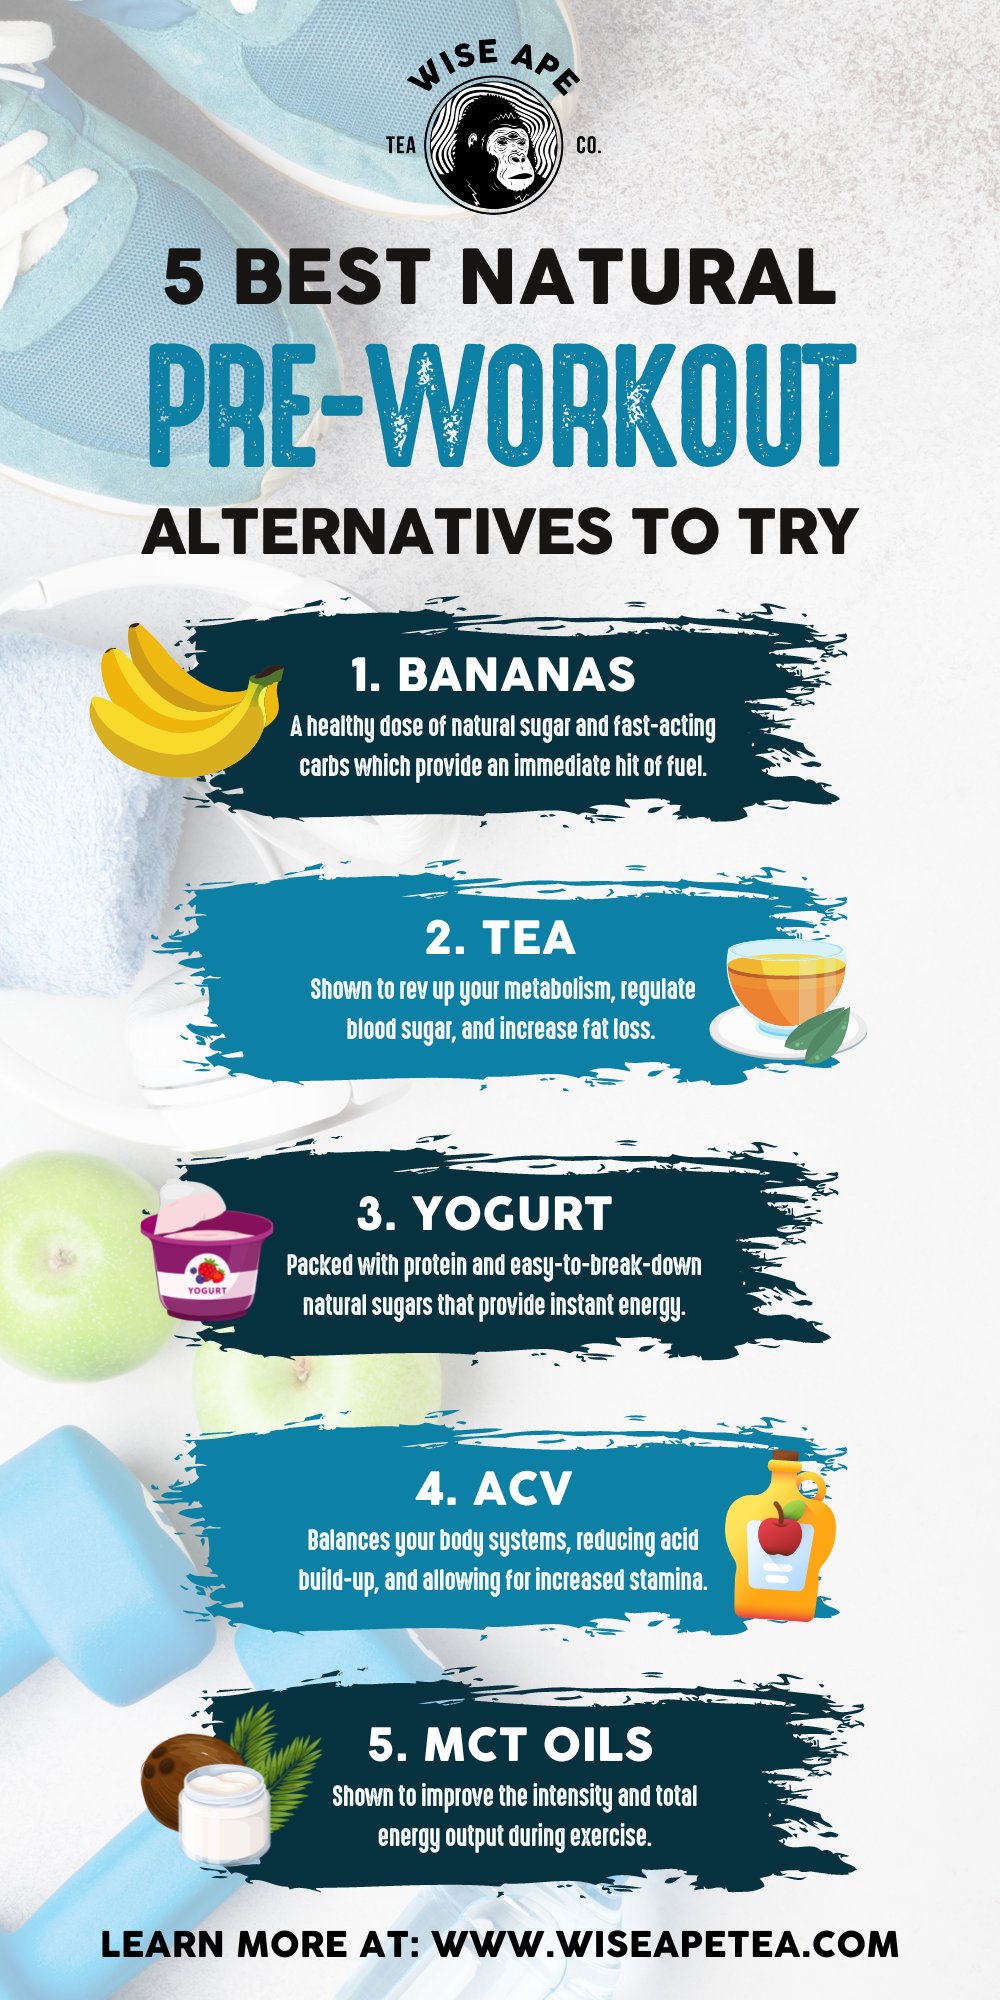 5 Pre-Workout Alternative Ideas to Energize Your Workout Naturally